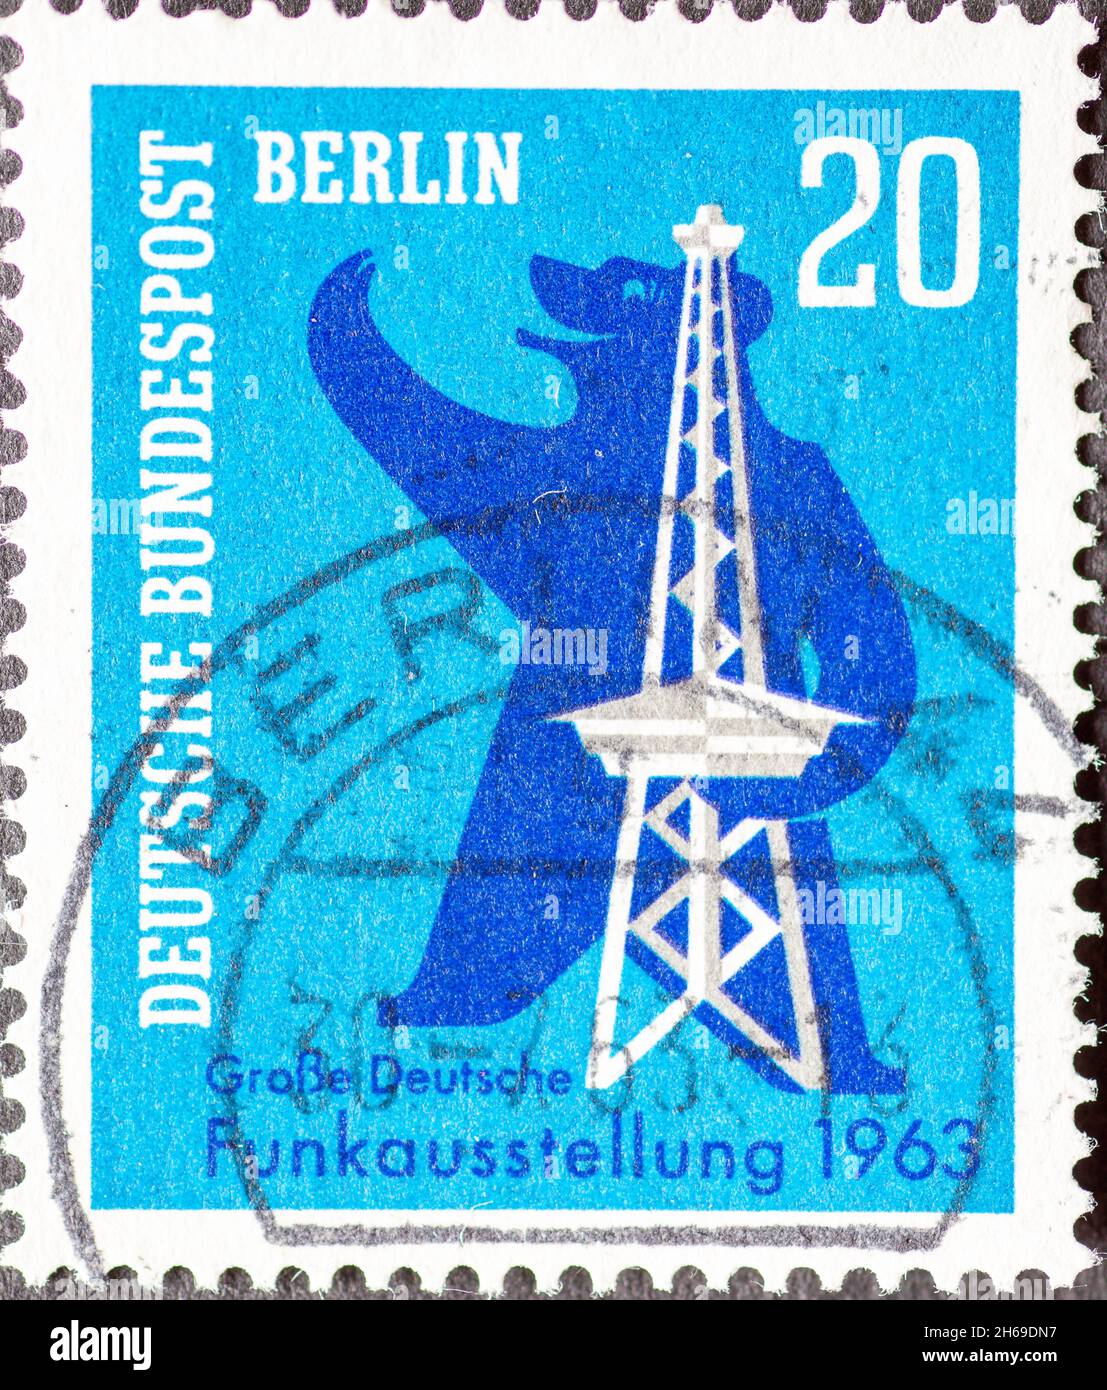 GERMANY, Berlin - CIRCA 1963: a postage stamp from Germany, Berlin showing the Berliner Bär with radio tower in the background. Large German radio exh Stock Photo